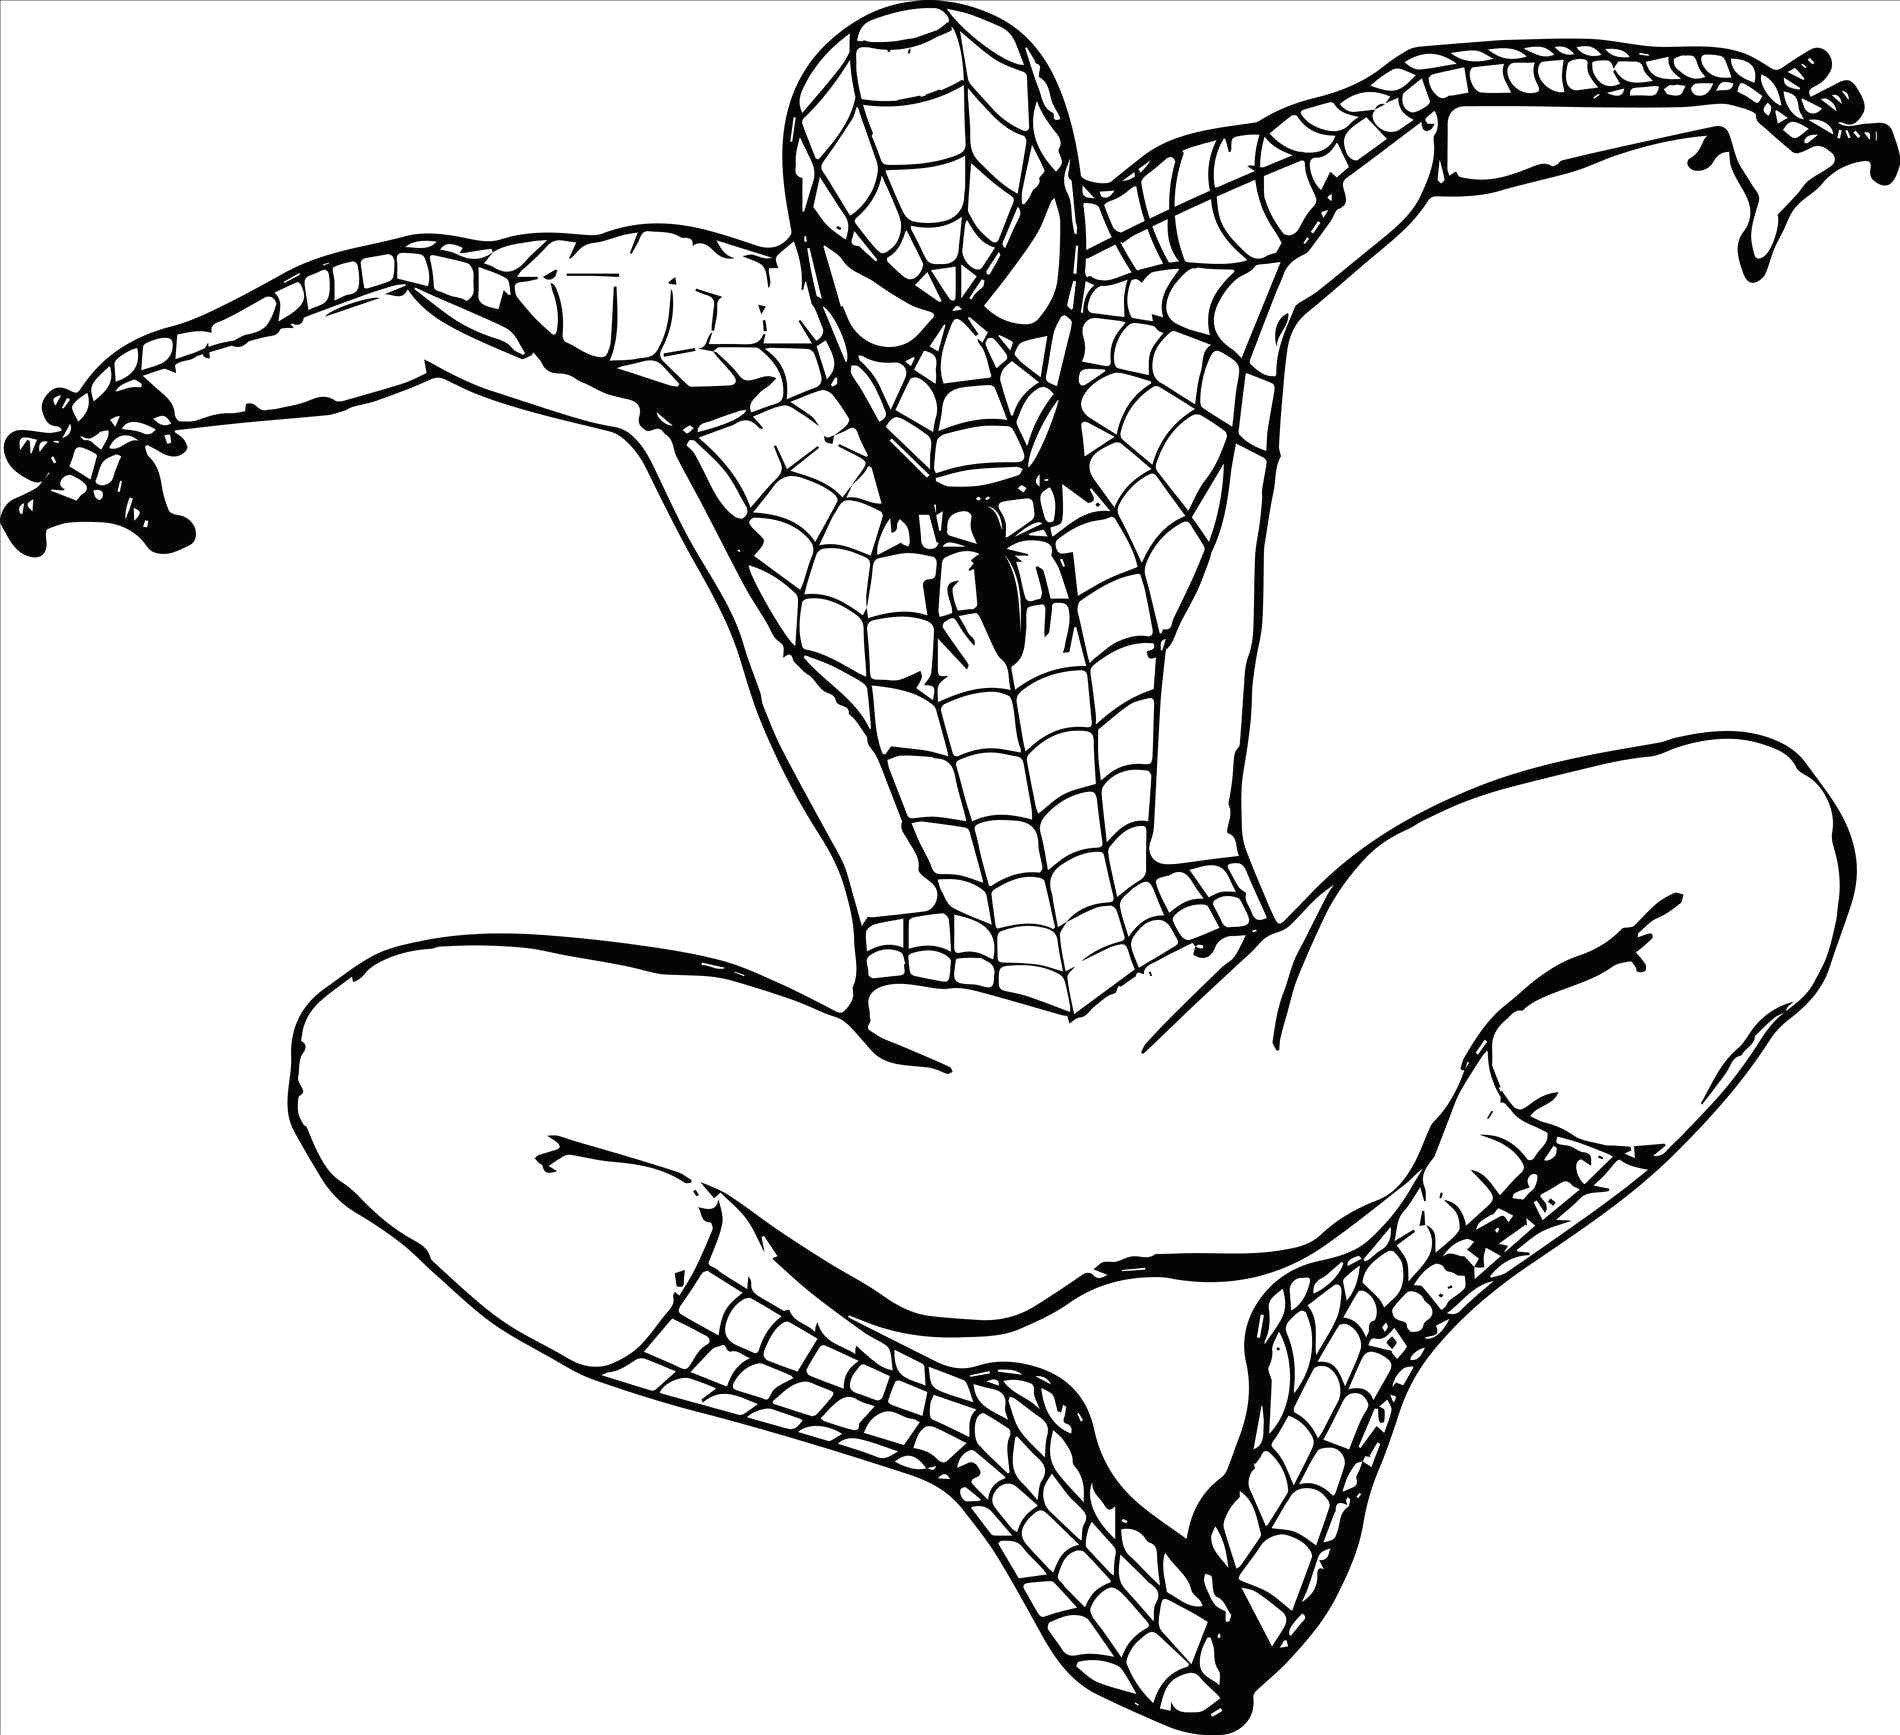 Easy Drawings You Can Draw Superheroes Easy to Draw Spiderman Coloring Pages Luxury 0 0d